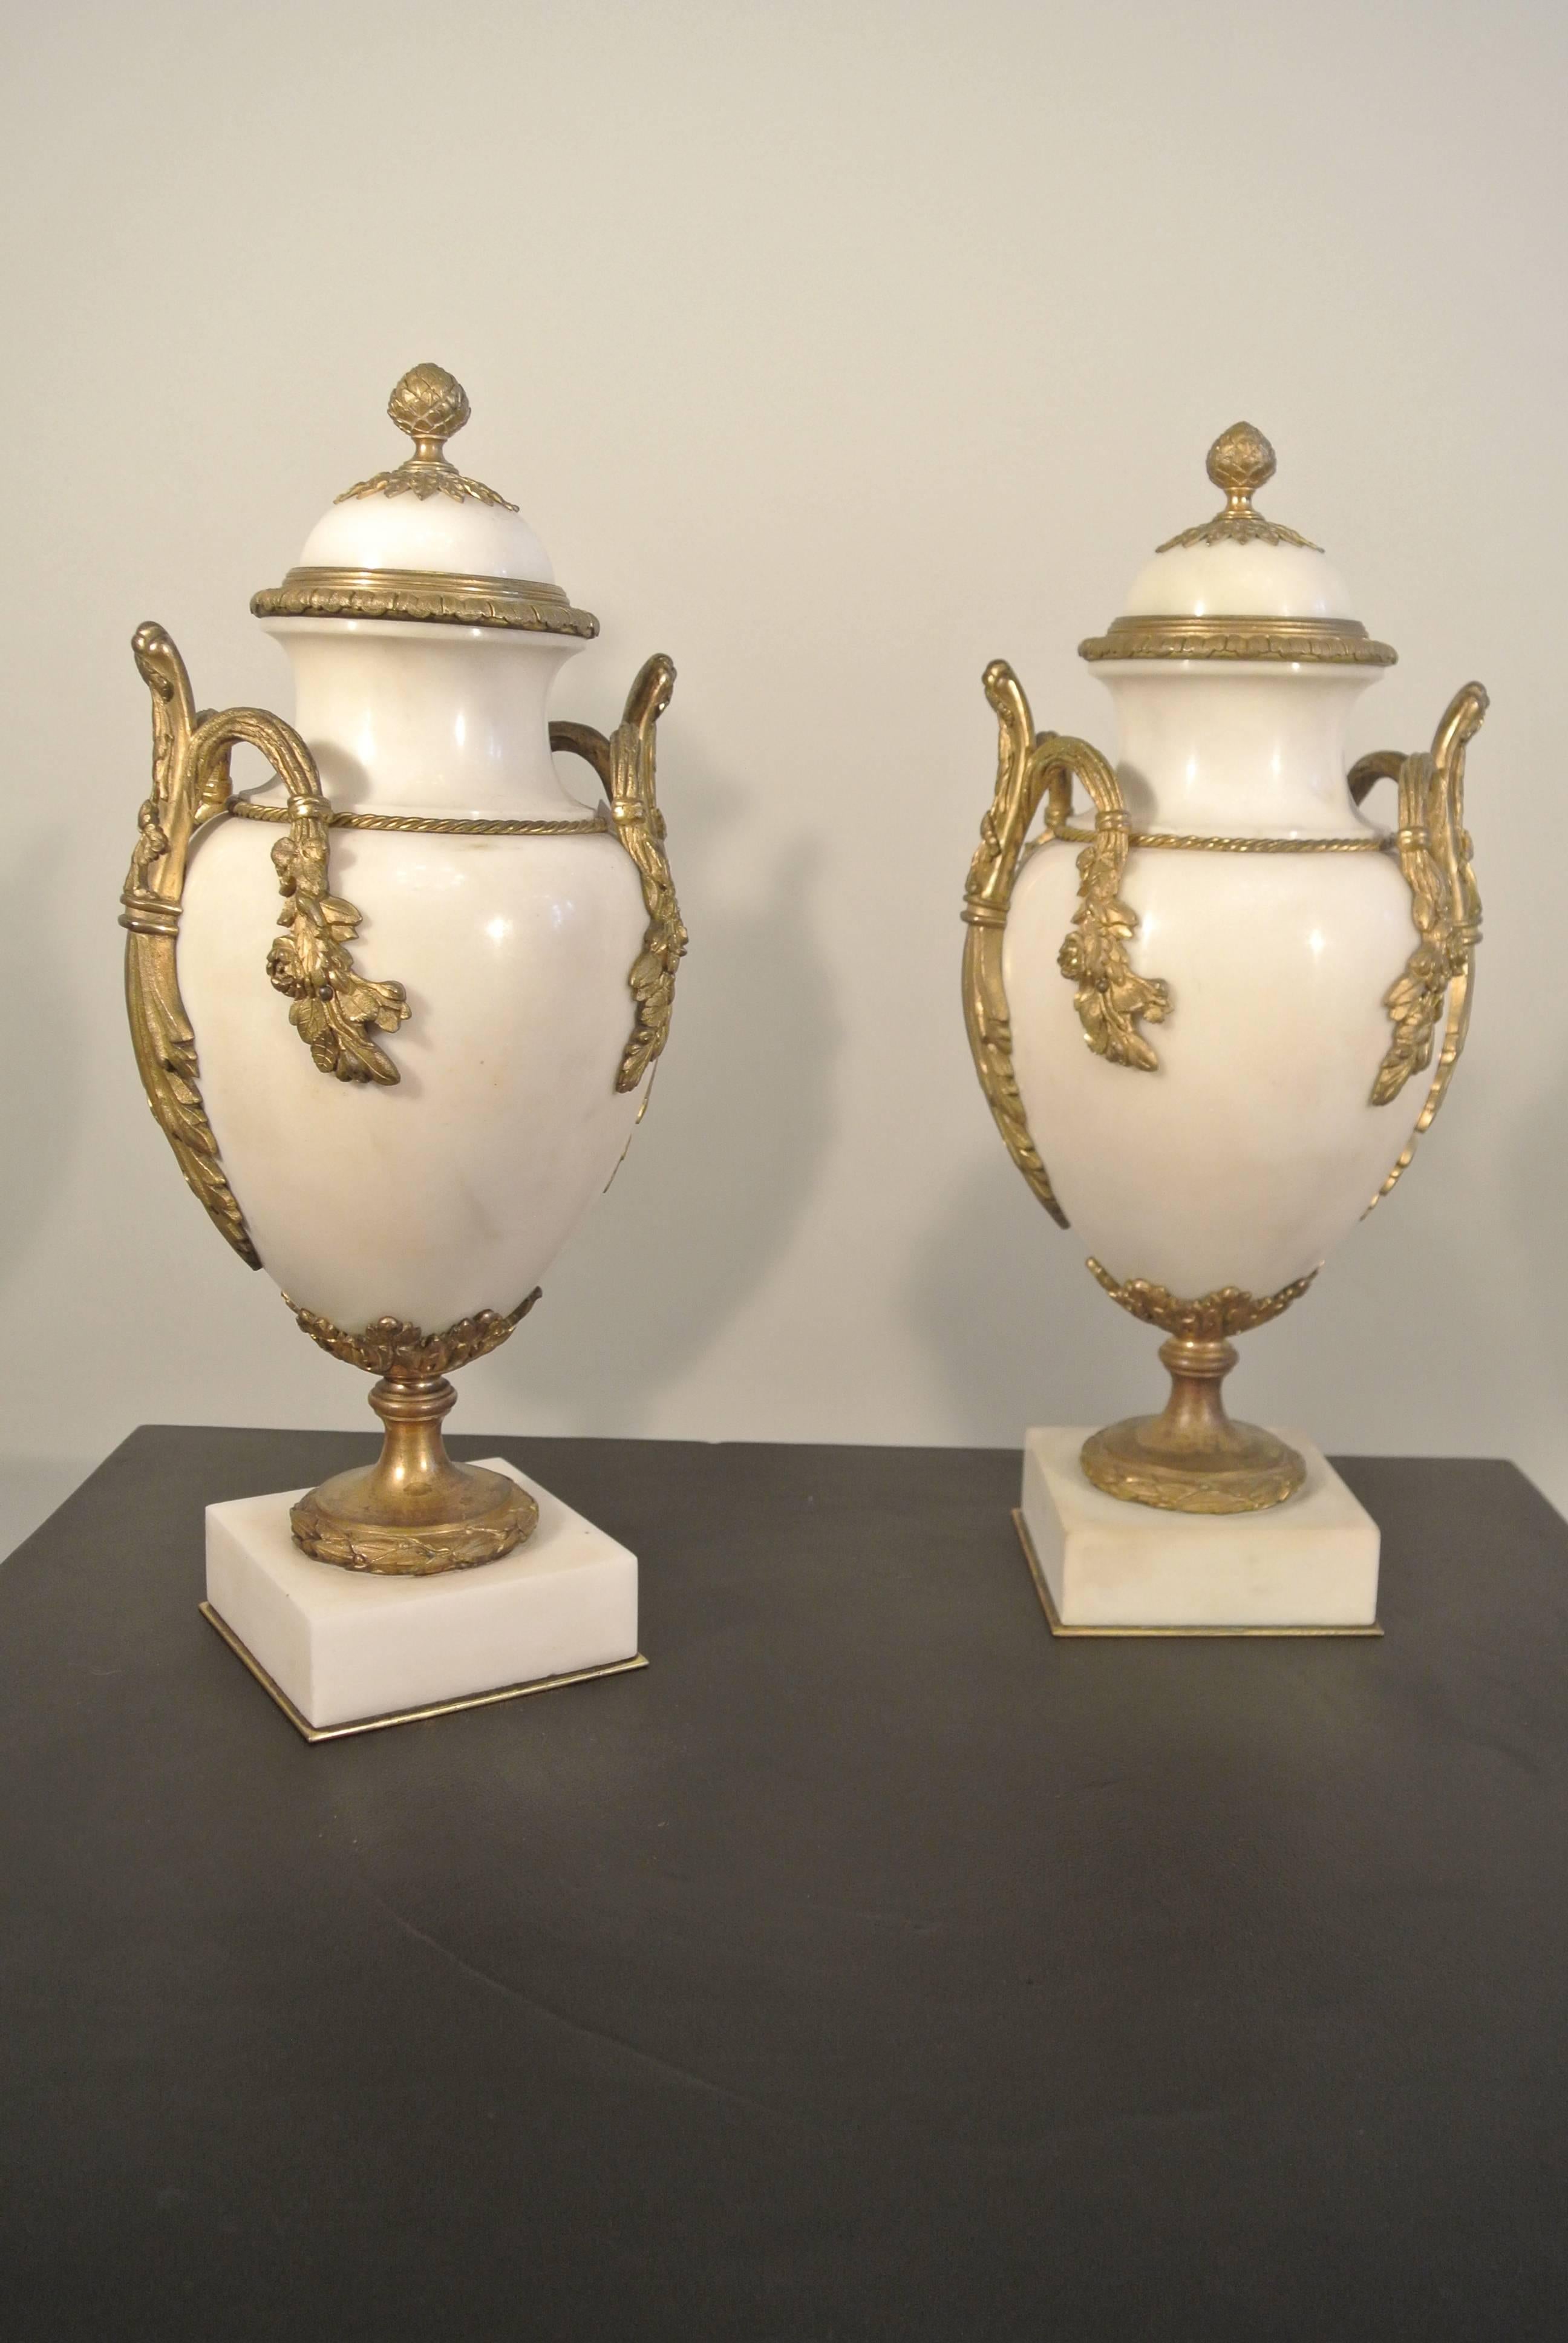 A beautiful pair of white marble jars with gold gilded bronze mounts,  19th Century
Measures: 32 cm x 15 cm x 12 cm.
 